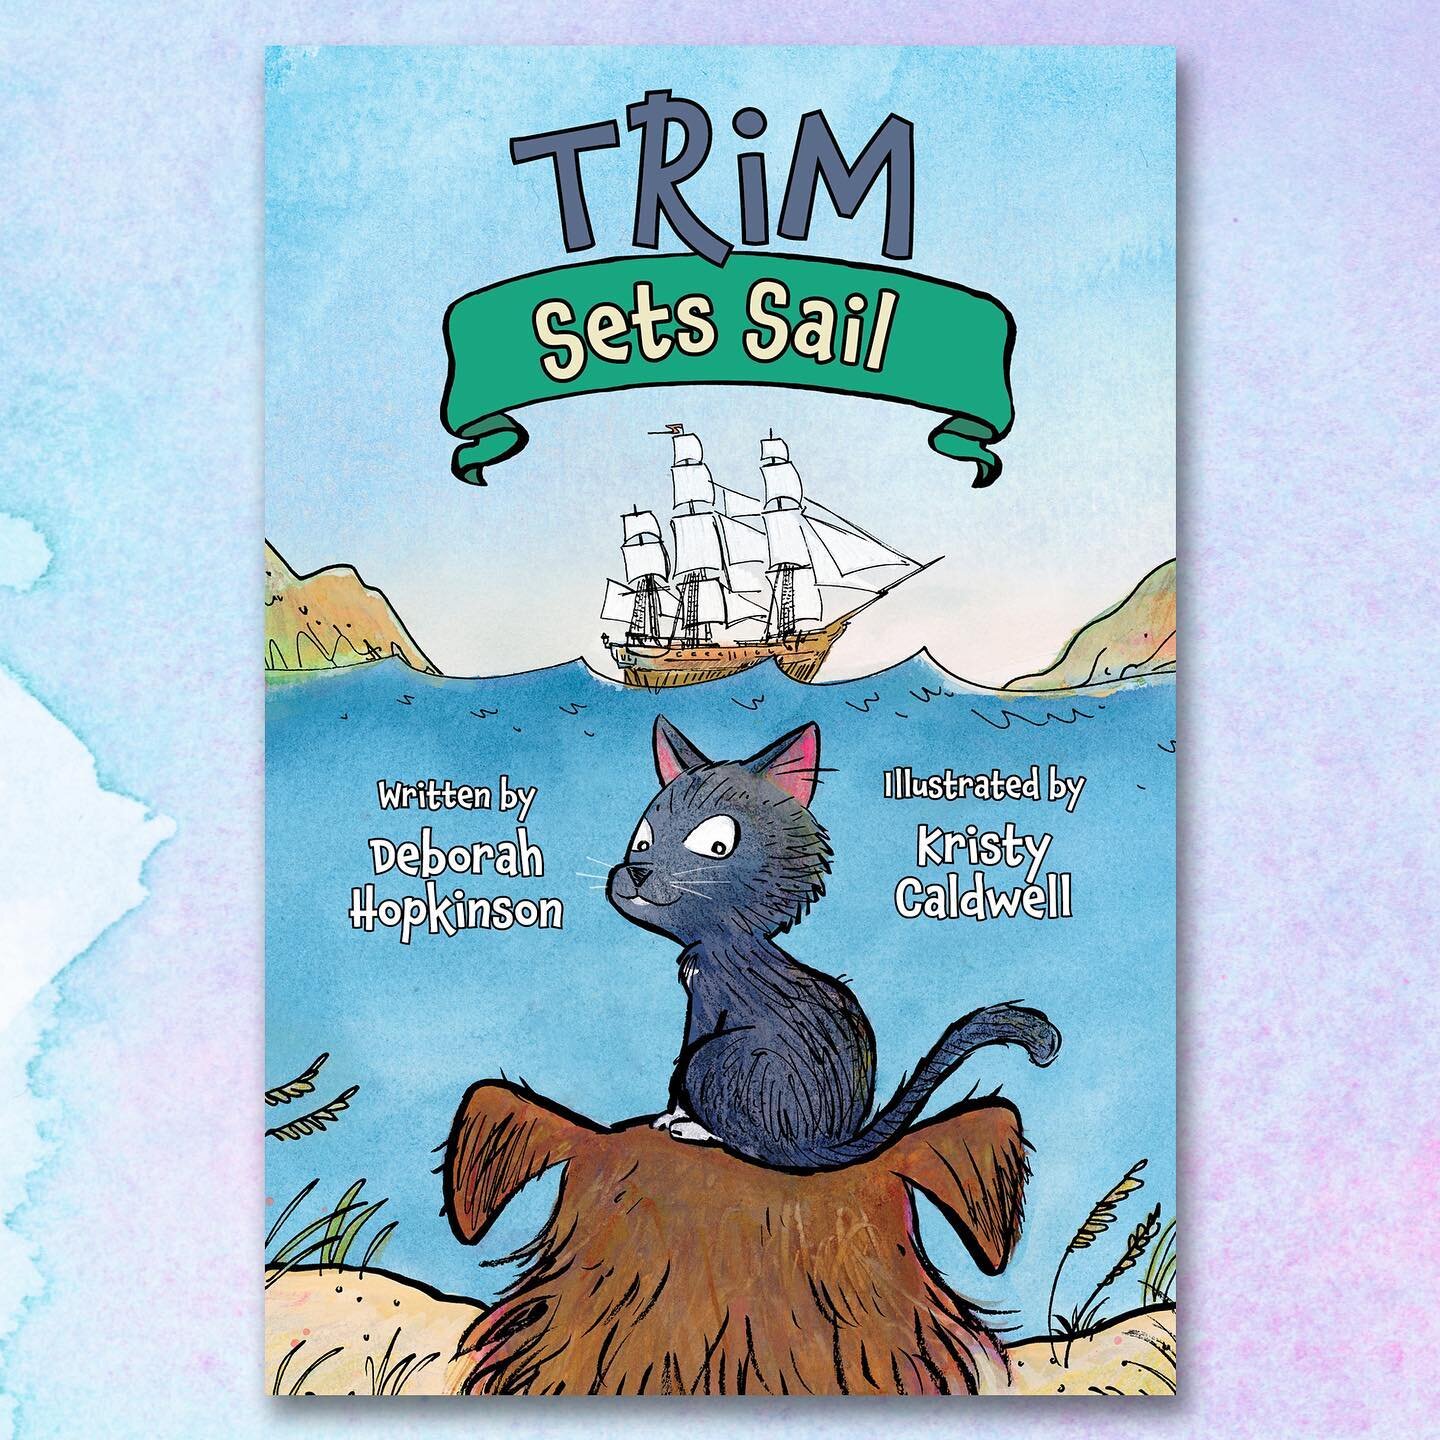 It's happening! Trim Sets Sail on October 3. In the early 1800s a cat named Trim boarded a ship and never looked back. I'd join him if I could, but the next best thing is talking about his adventures with @deborah_hopkinson and then drawing them from